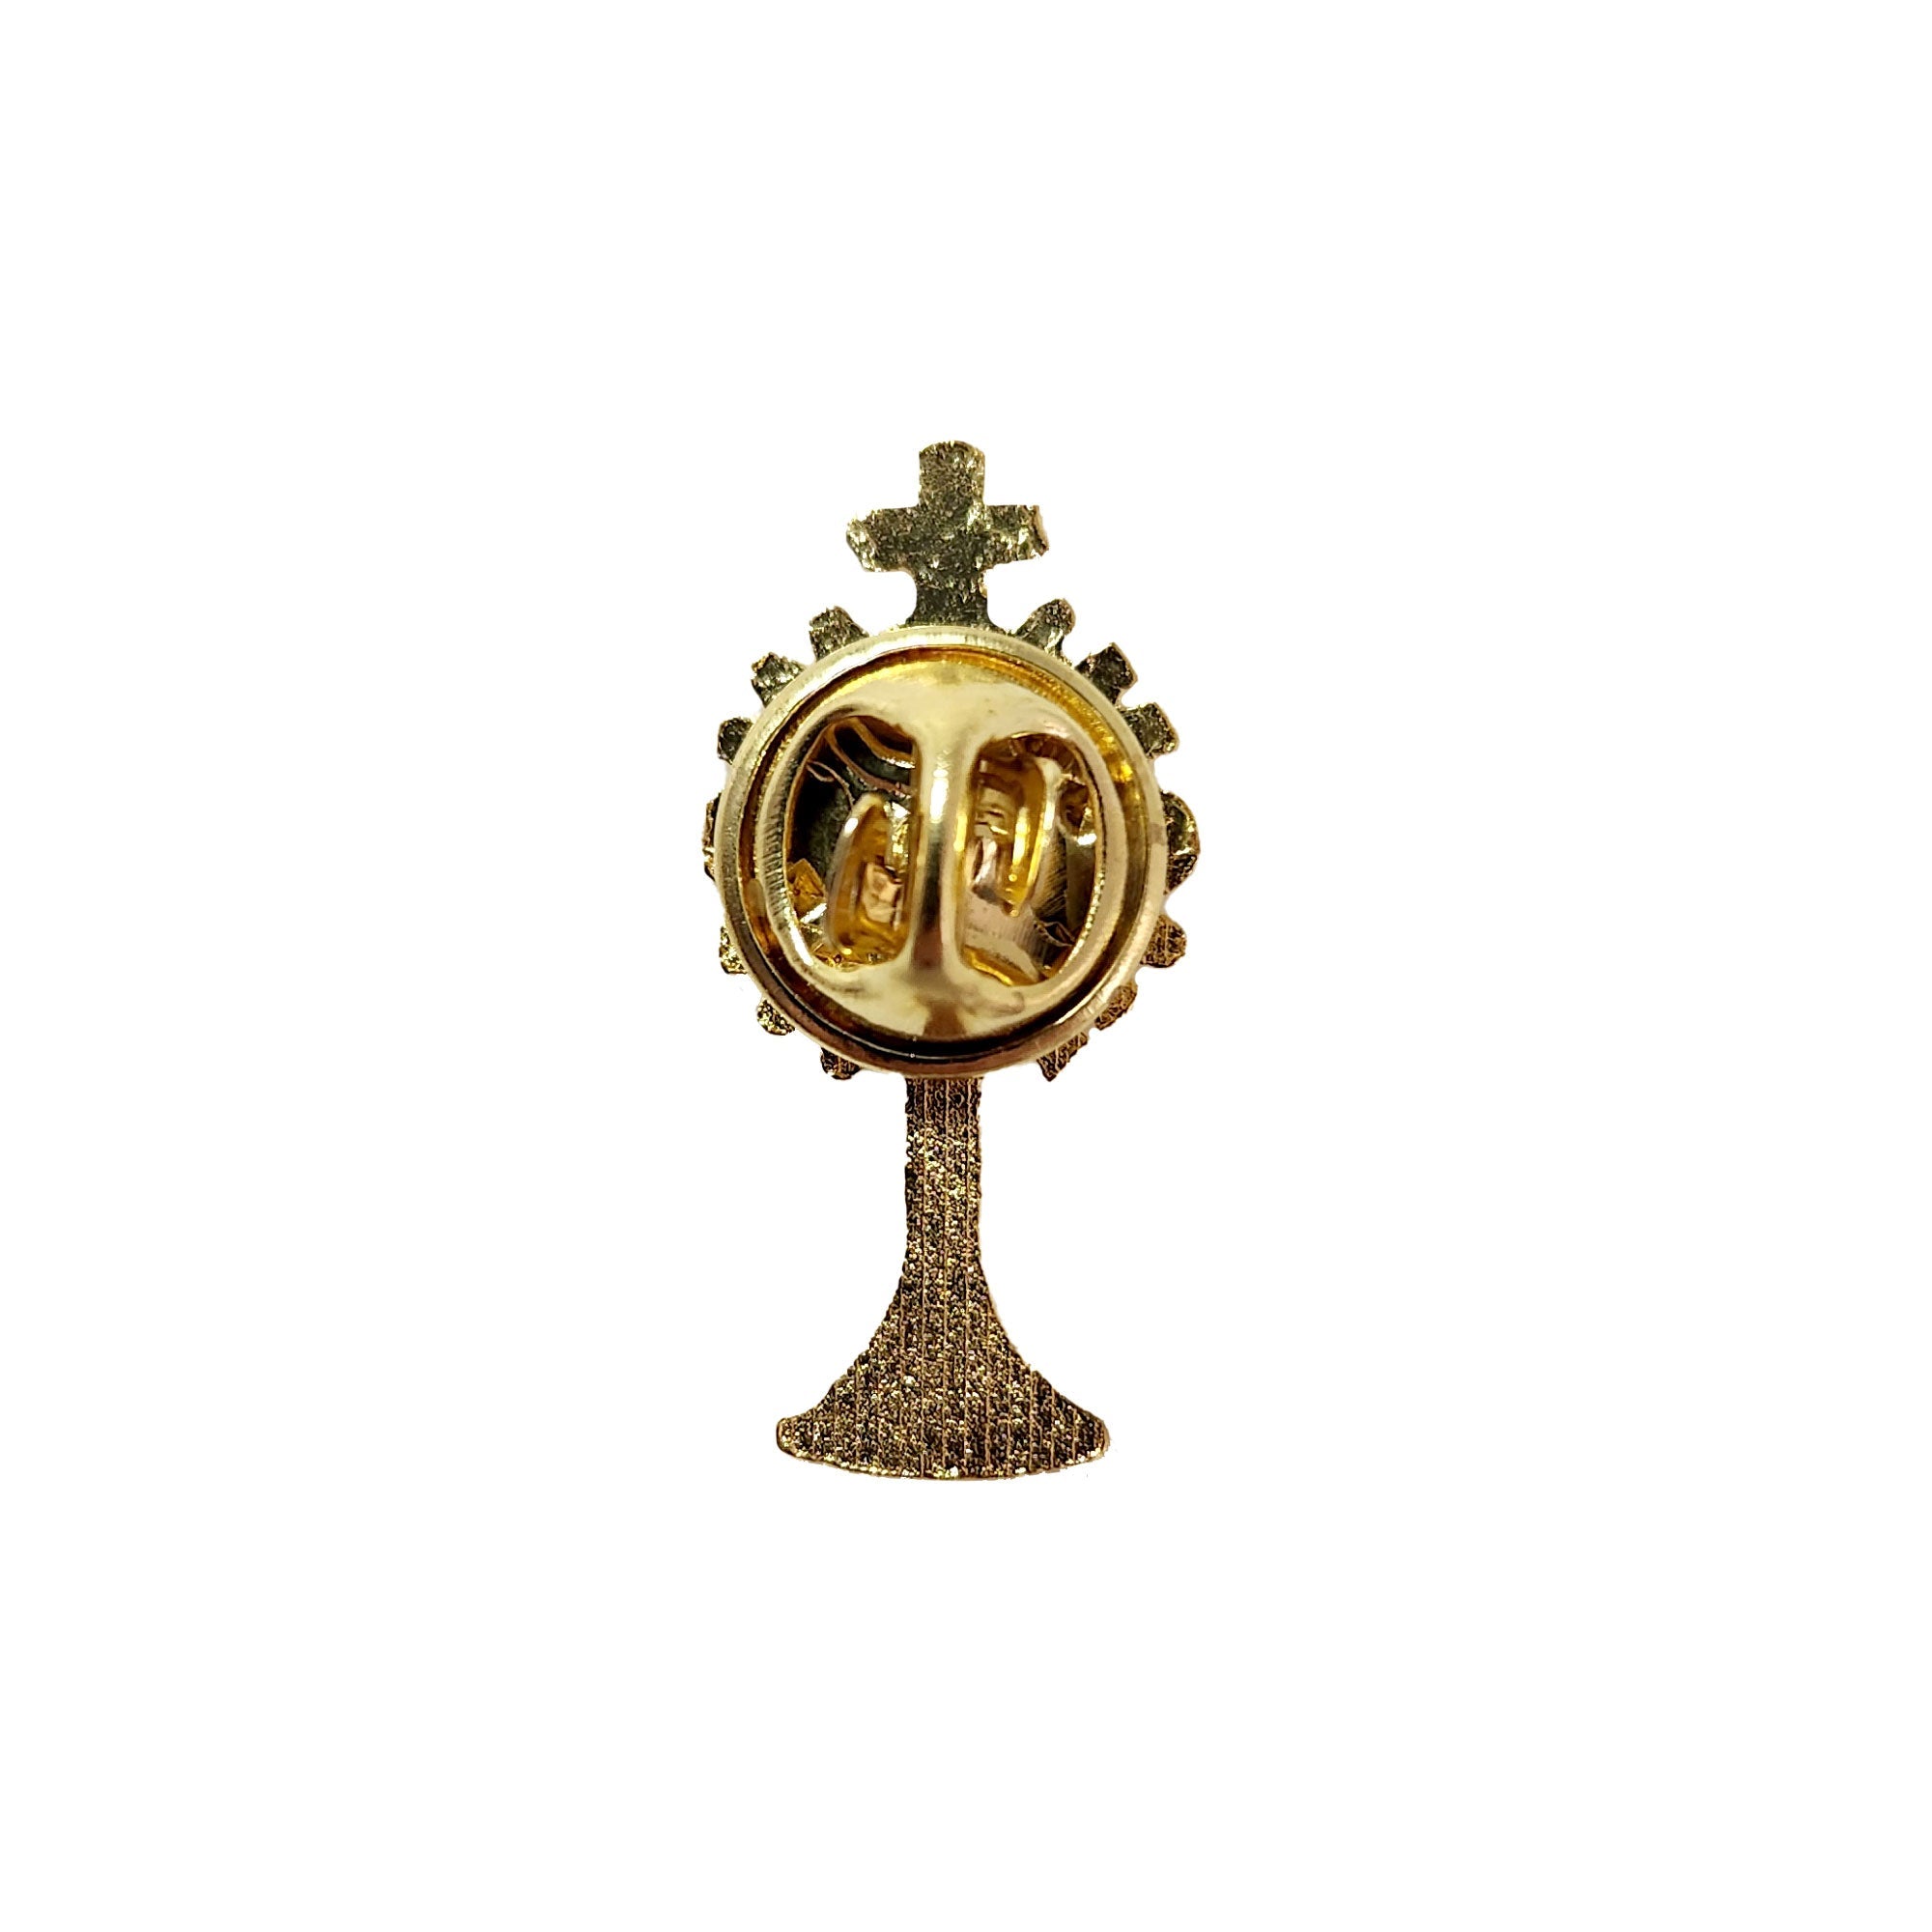 Metal Pin on Card, First Communion Monstrance – Gold and White